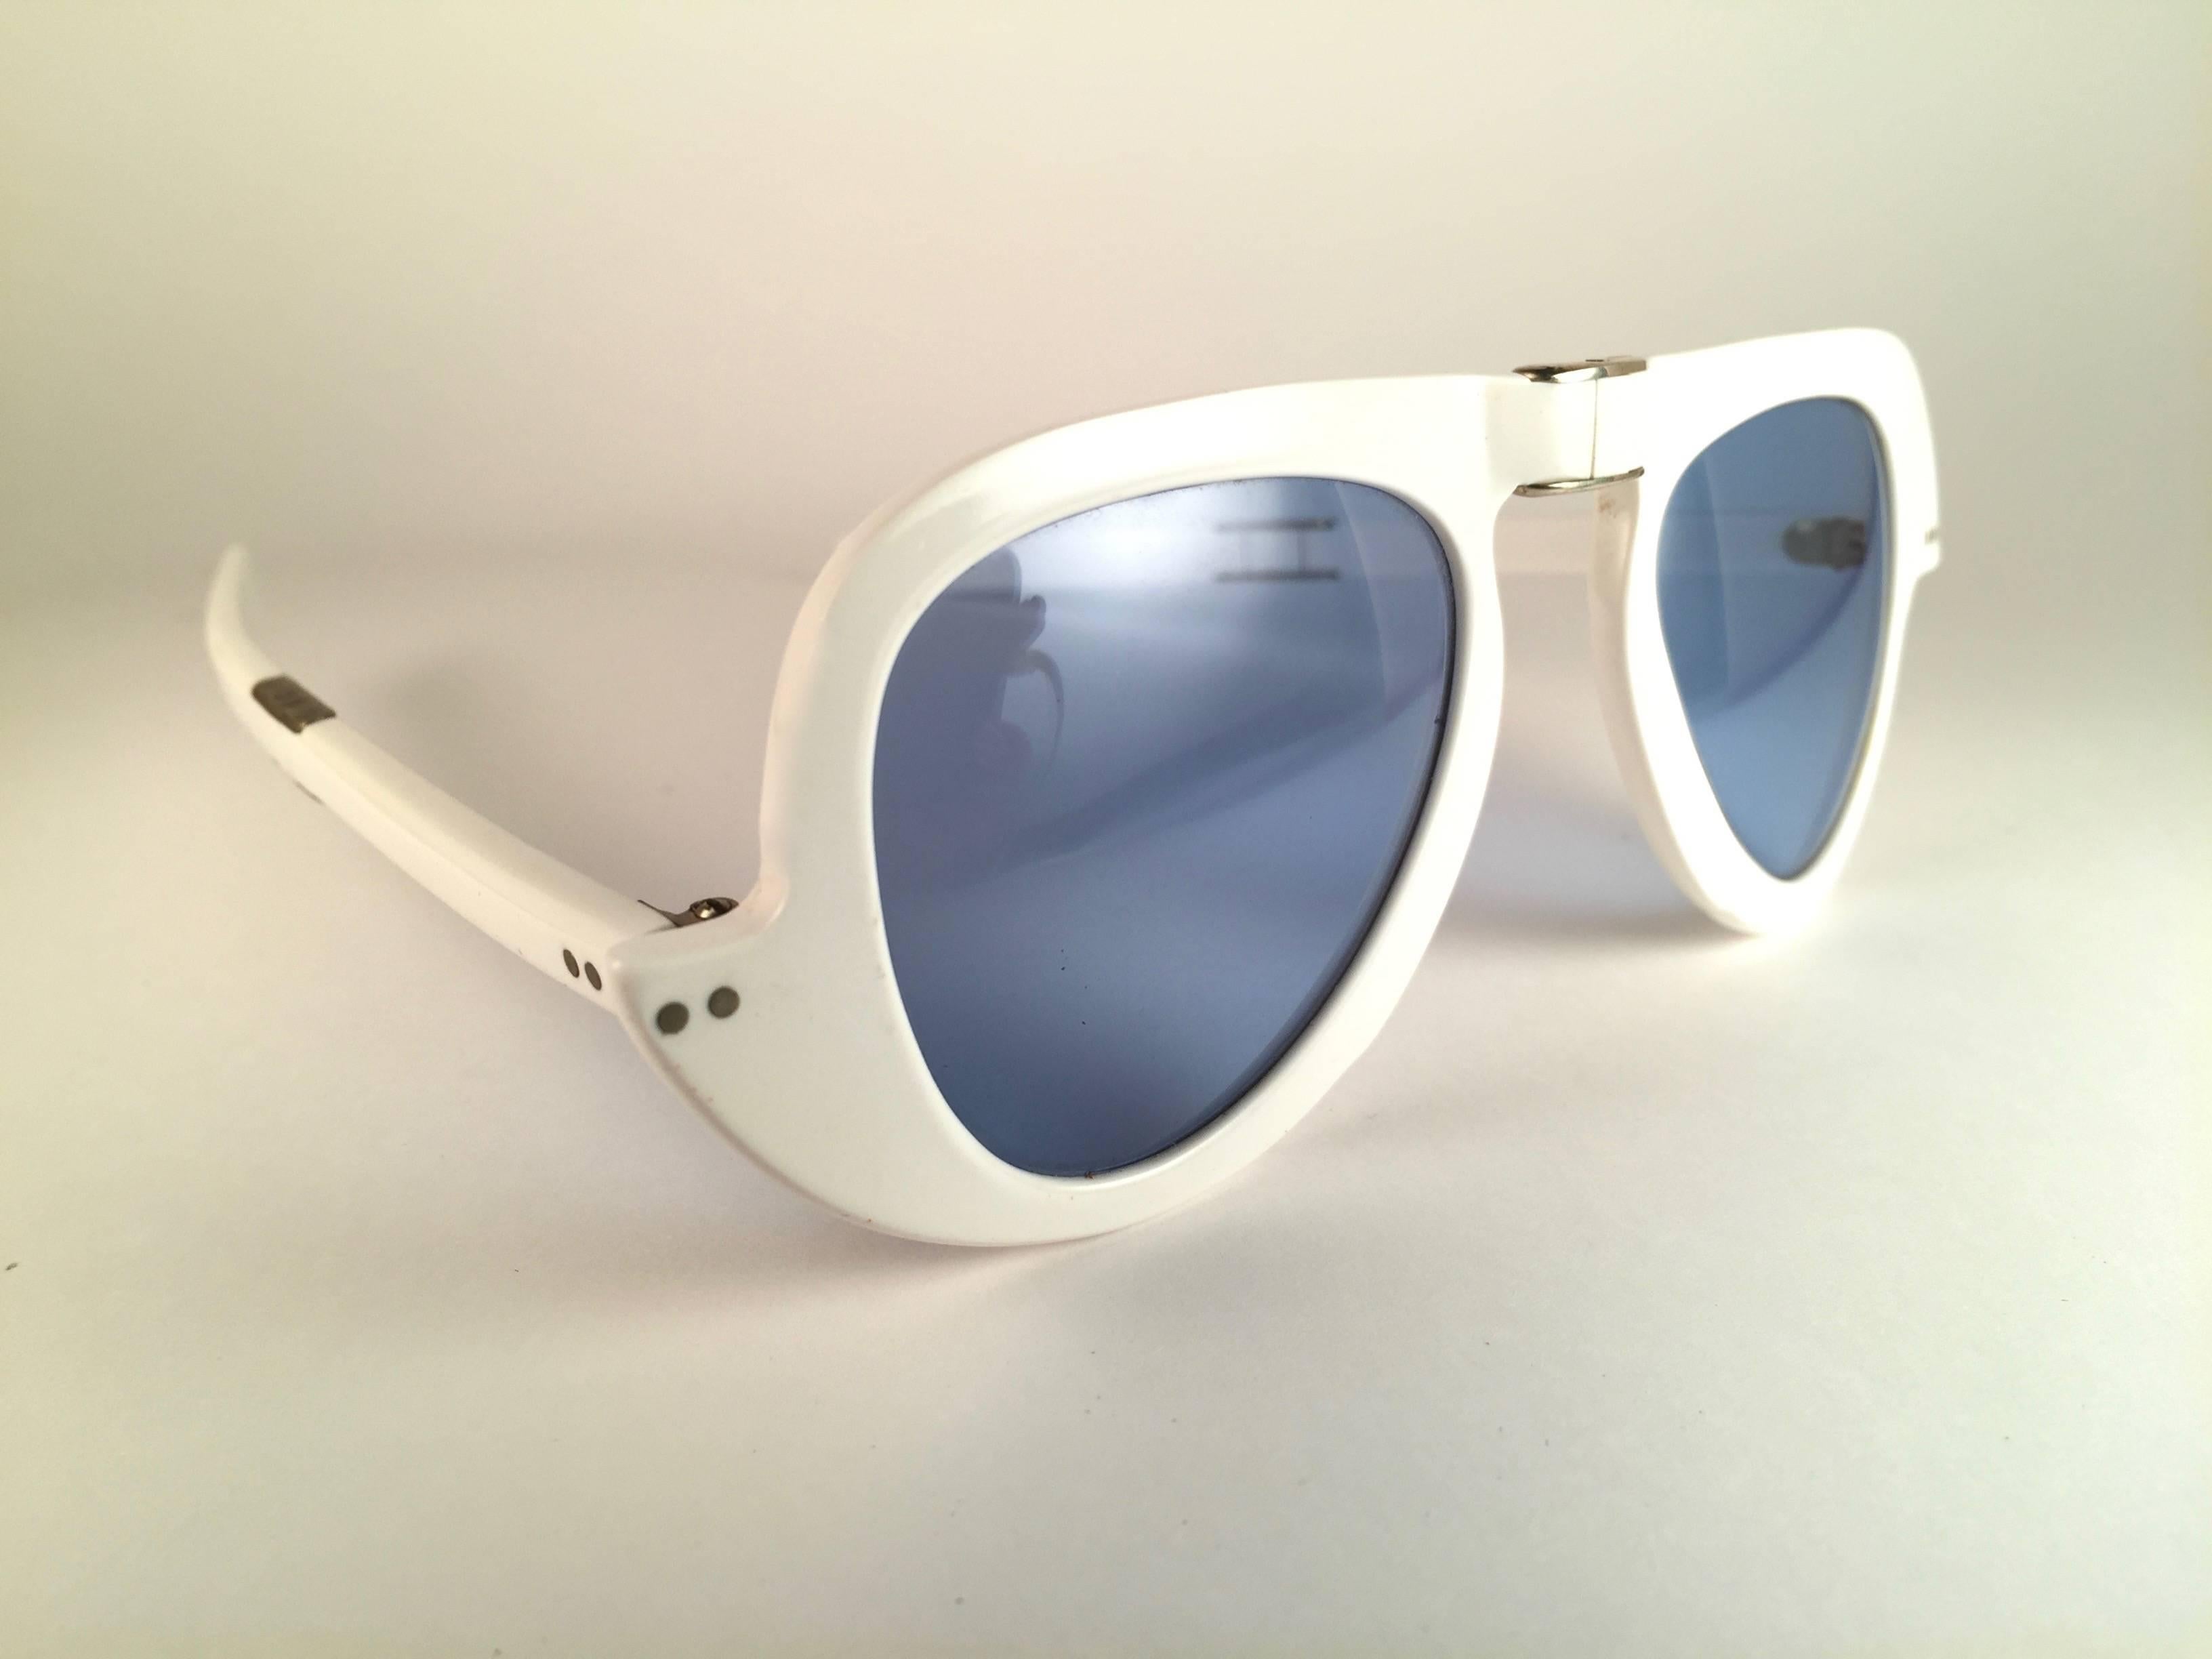 New vintage futuristic Pierre Cardin white foldable rectangular frame sporting a beautiful pair of blue lenses. This pair have slight wear on them due to to nearly 60 years of storage. 

This pair of vintage Pierre Cardin is a unique piece rarely